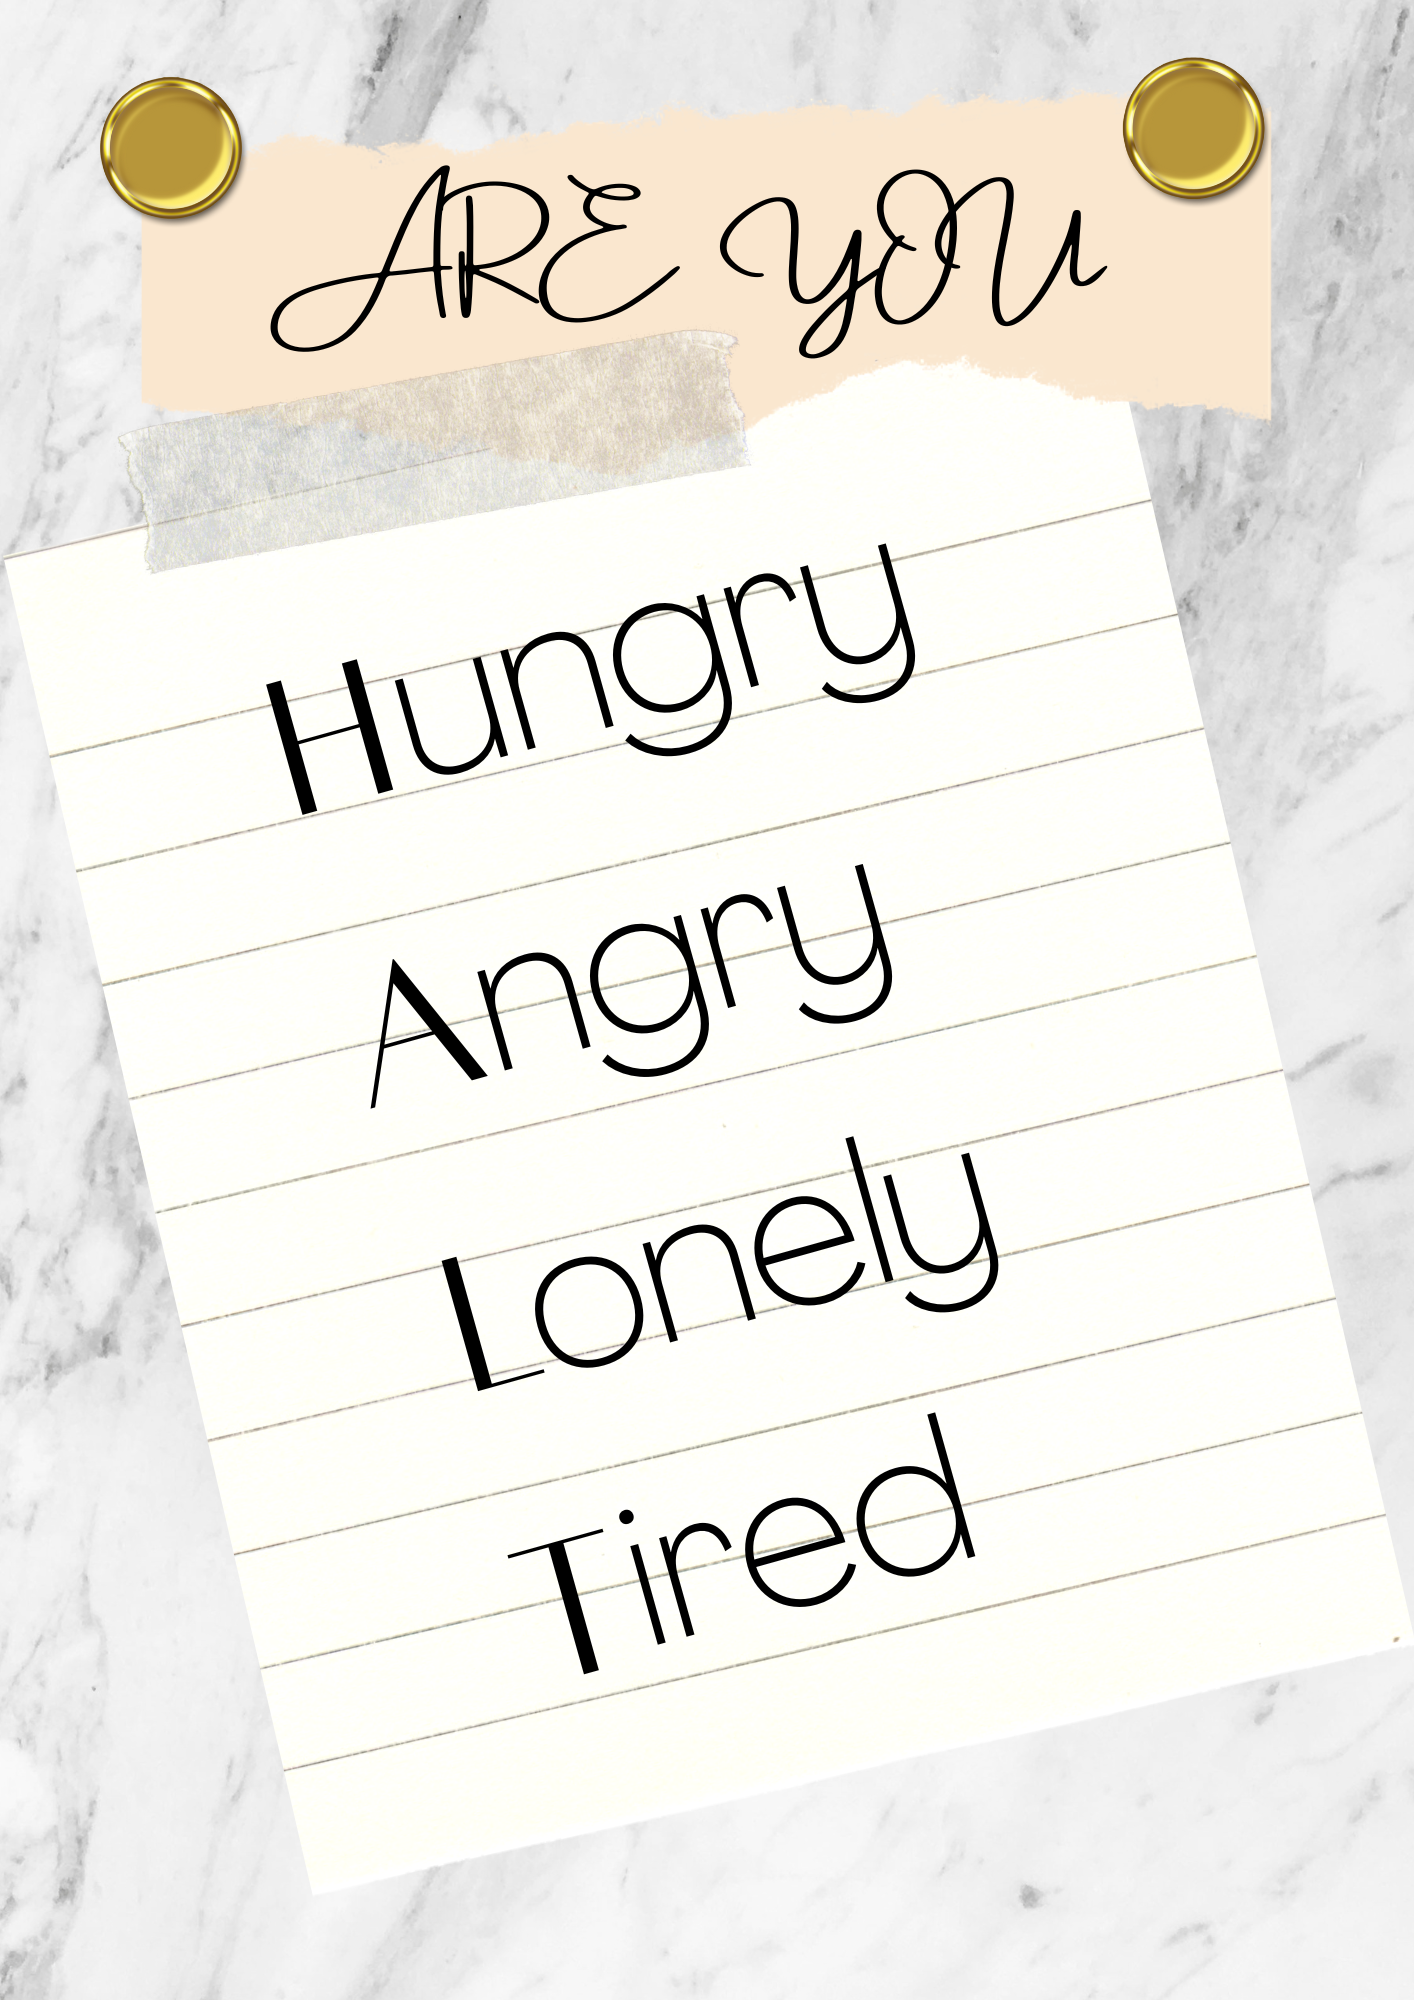 HALT (Hungry, Angry, Lonely, Tired) Fridge Poster x2 (Free Digital Download)